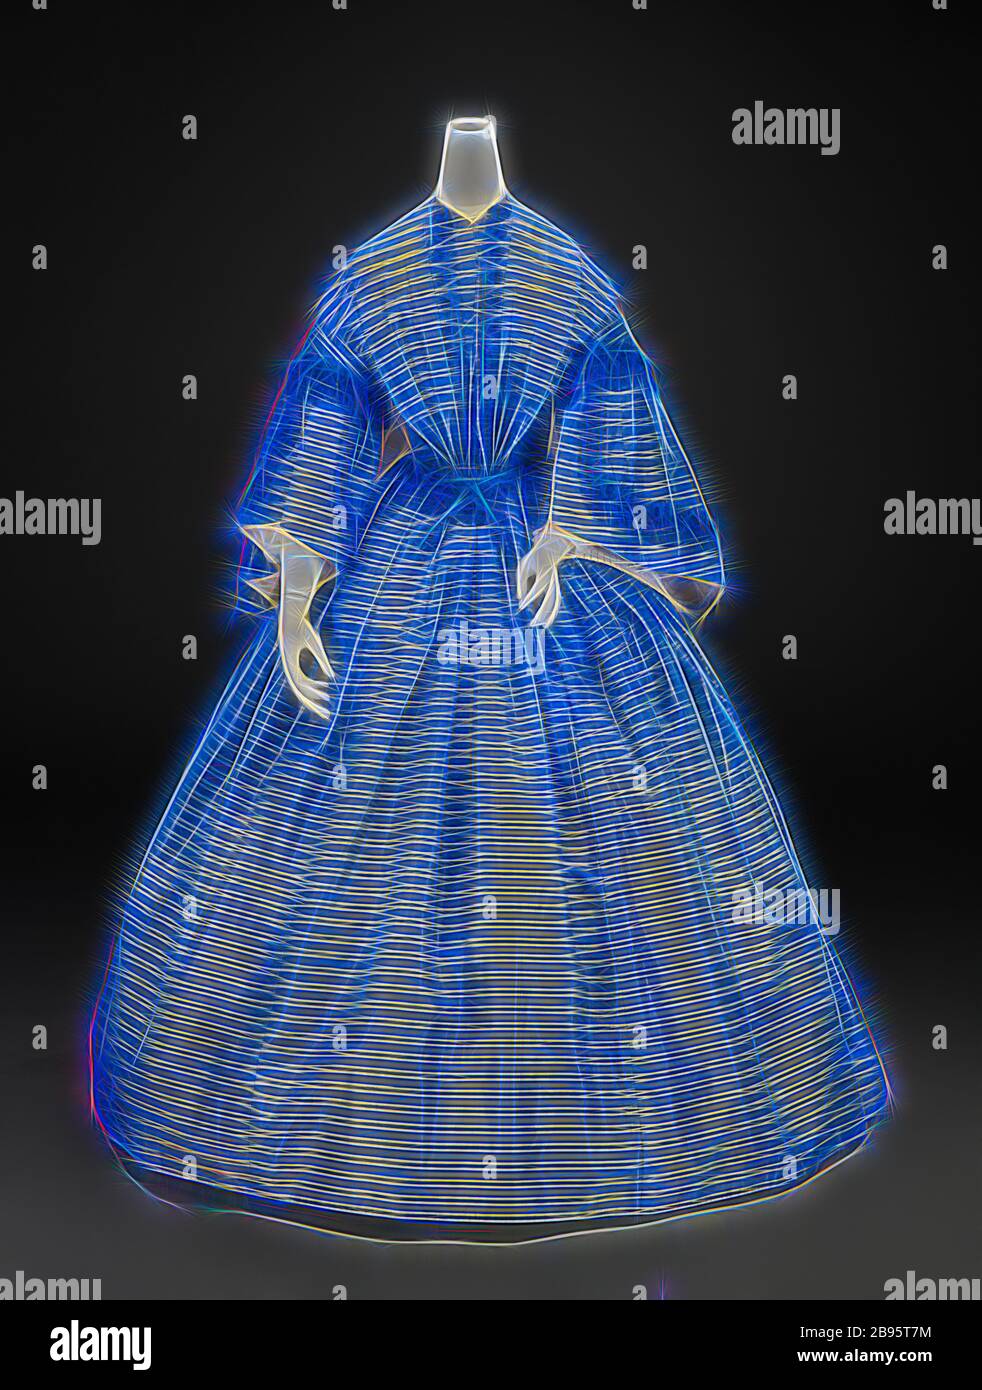 Muslin Dress High Resolution Stock Photography and Images - Alamy